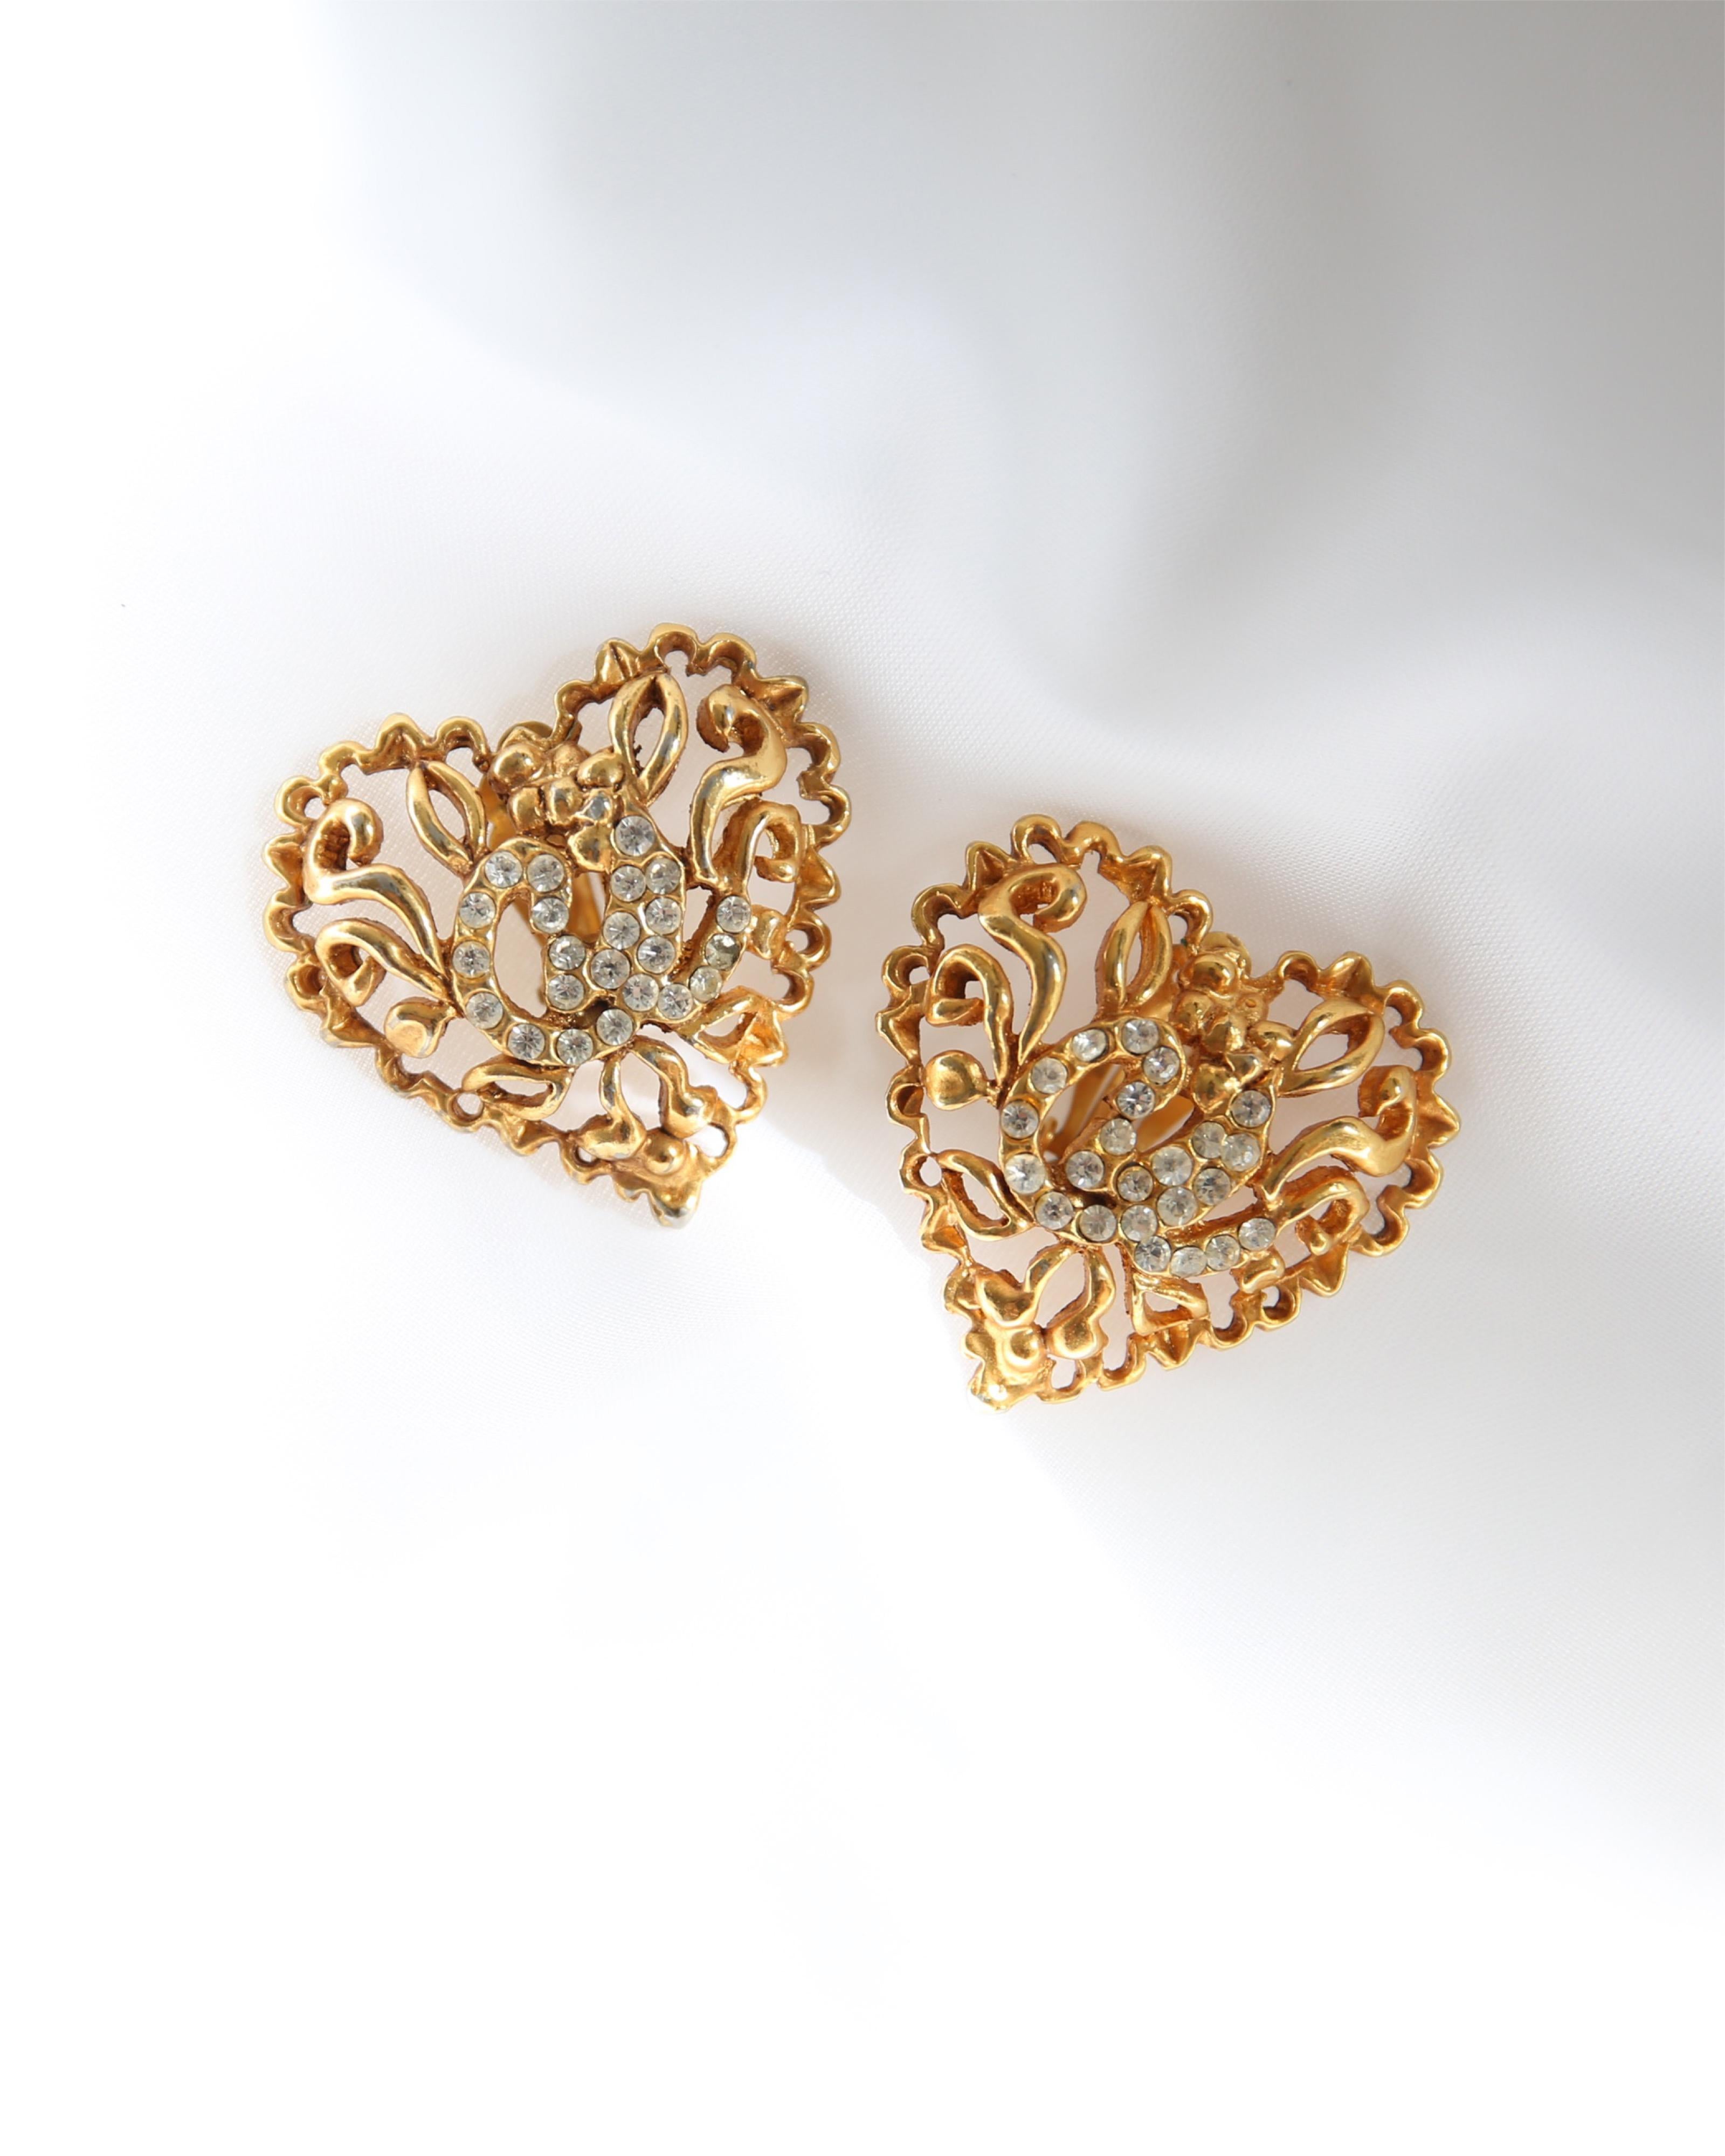 Vintage Christian Lacroix oversized gold filigree heart shaped earrings
Each earrings has a large CL spelt out in crystals 
Clip on
CL stamped on the back
Circa 1980

Condition:
In good vintage condition with one missing crystal (Please refer to the